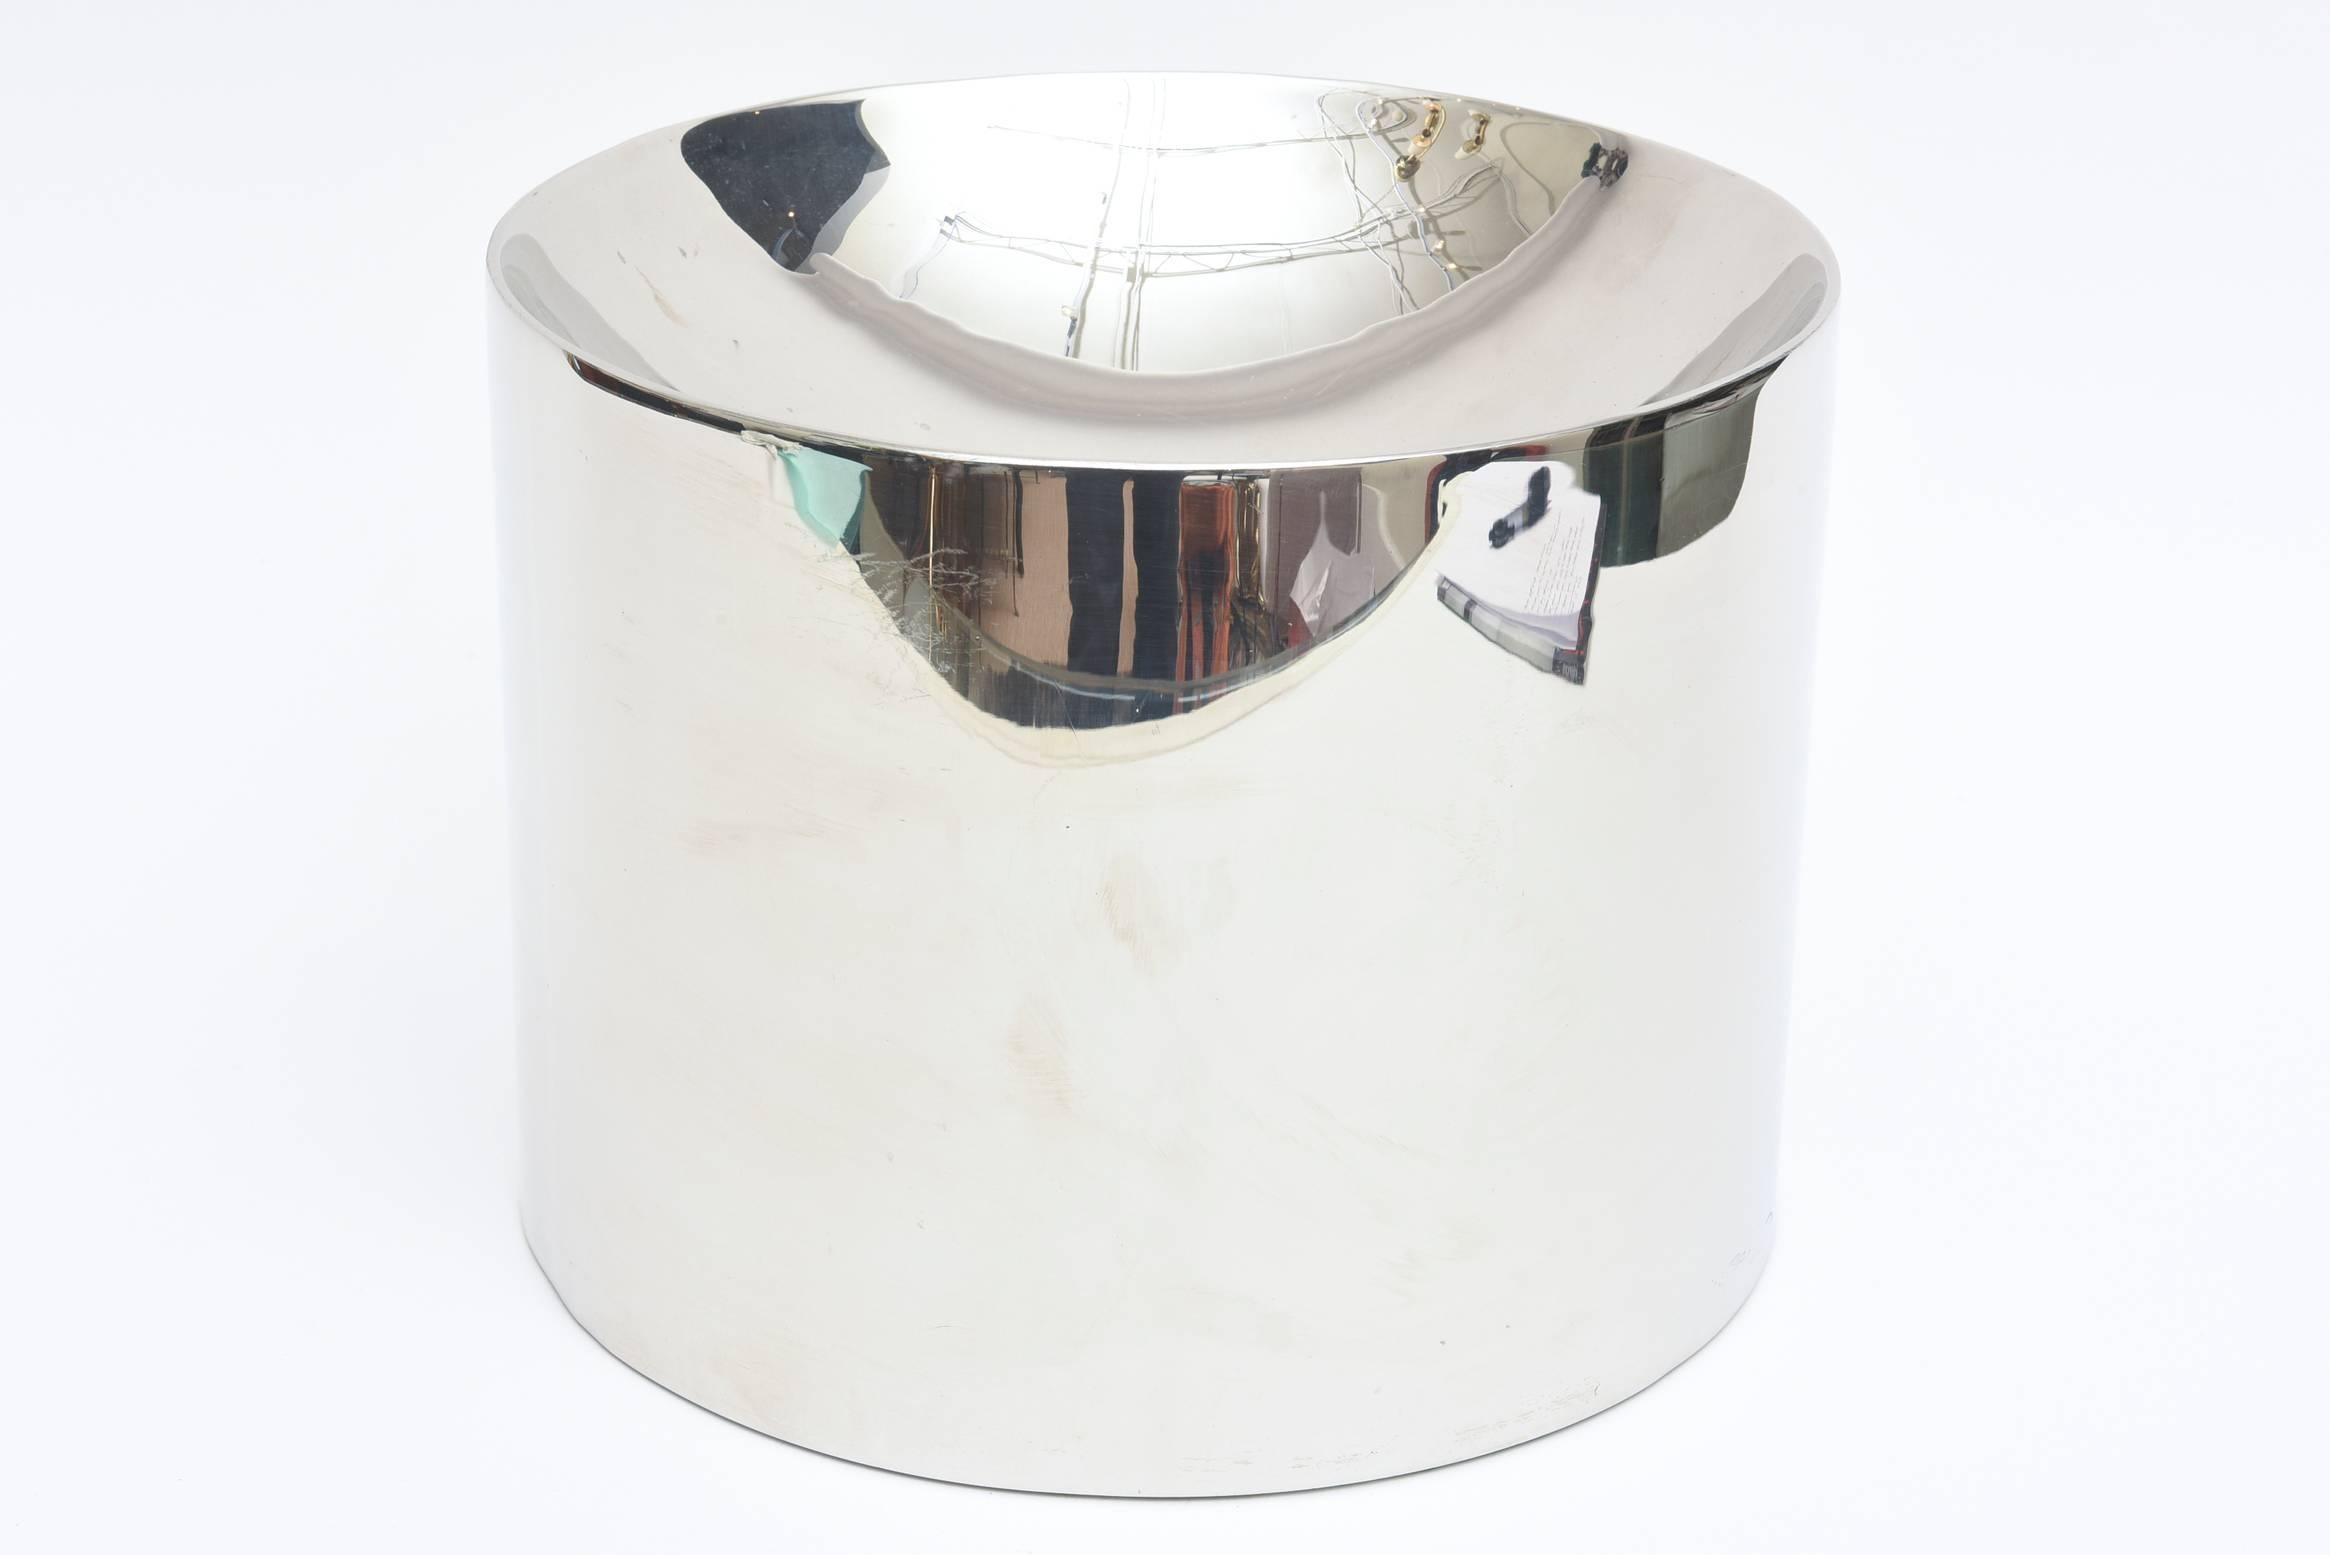 This heavy and solid polished Italian stainless steel sculptural bowl or vessel is monumental. 
It would be a great receptacle for mail on a console or for serving.
It is dramatic and even has the look of an Anish Kapoor sculpture. One that you can